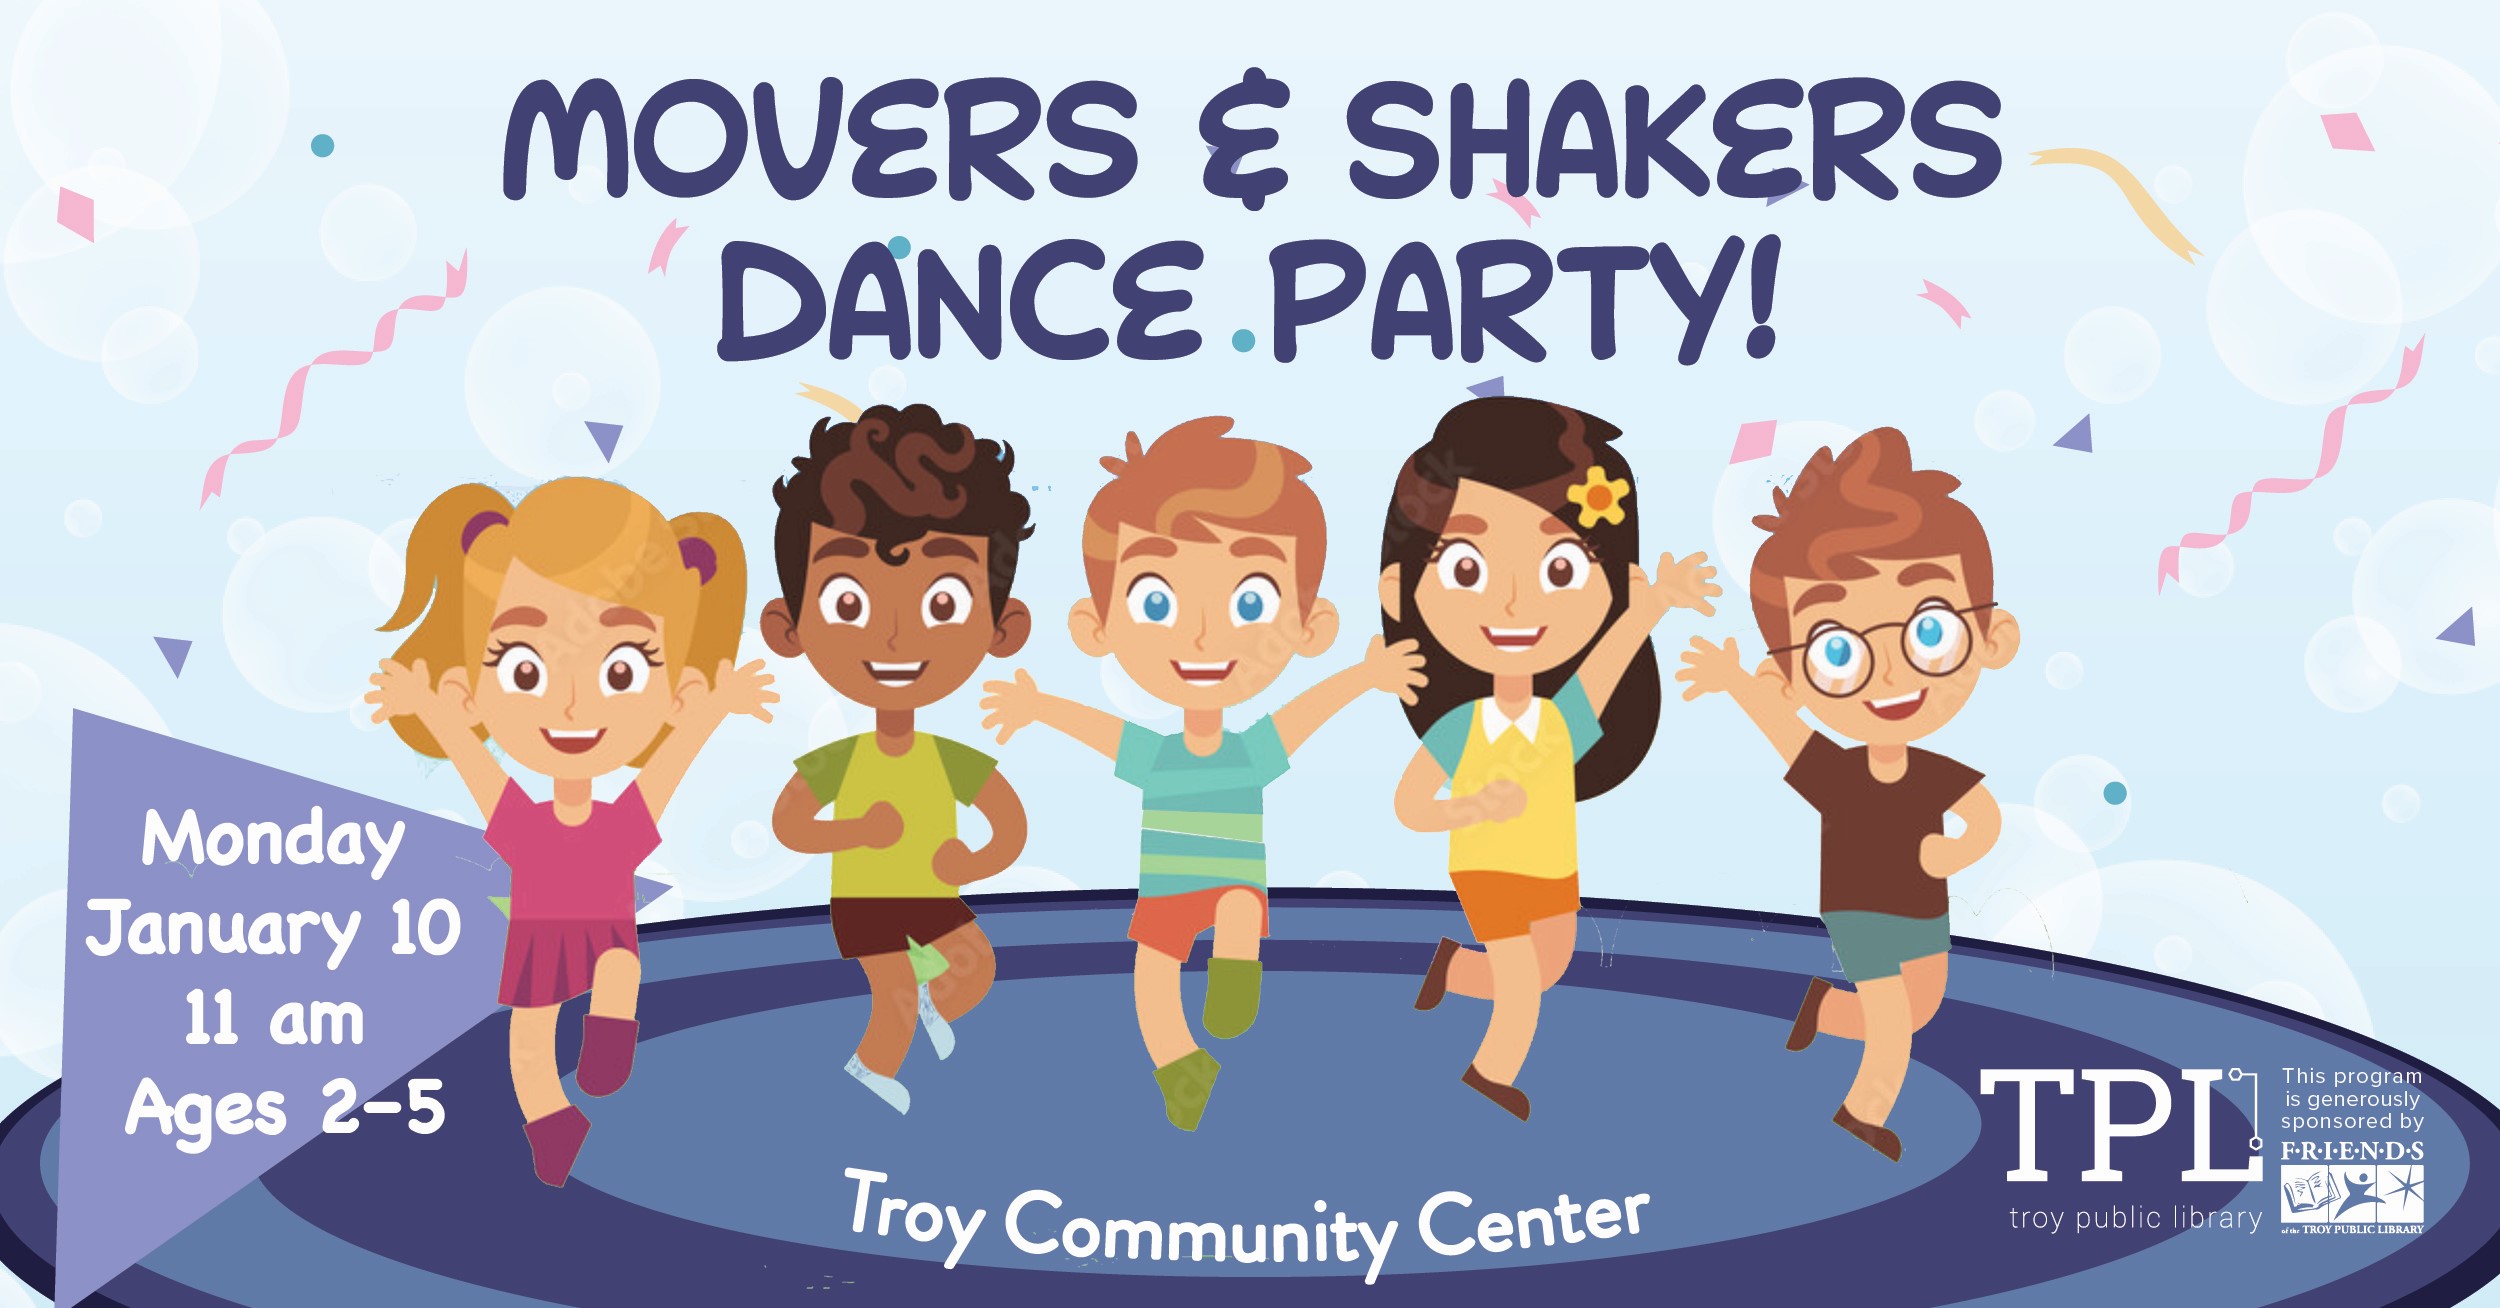 Movers & Shakers Dance Party! Ages 2-5 Monday, January 10 at 11am at the Troy Community Center. Sponsored by the Friends of the Troy Public Library